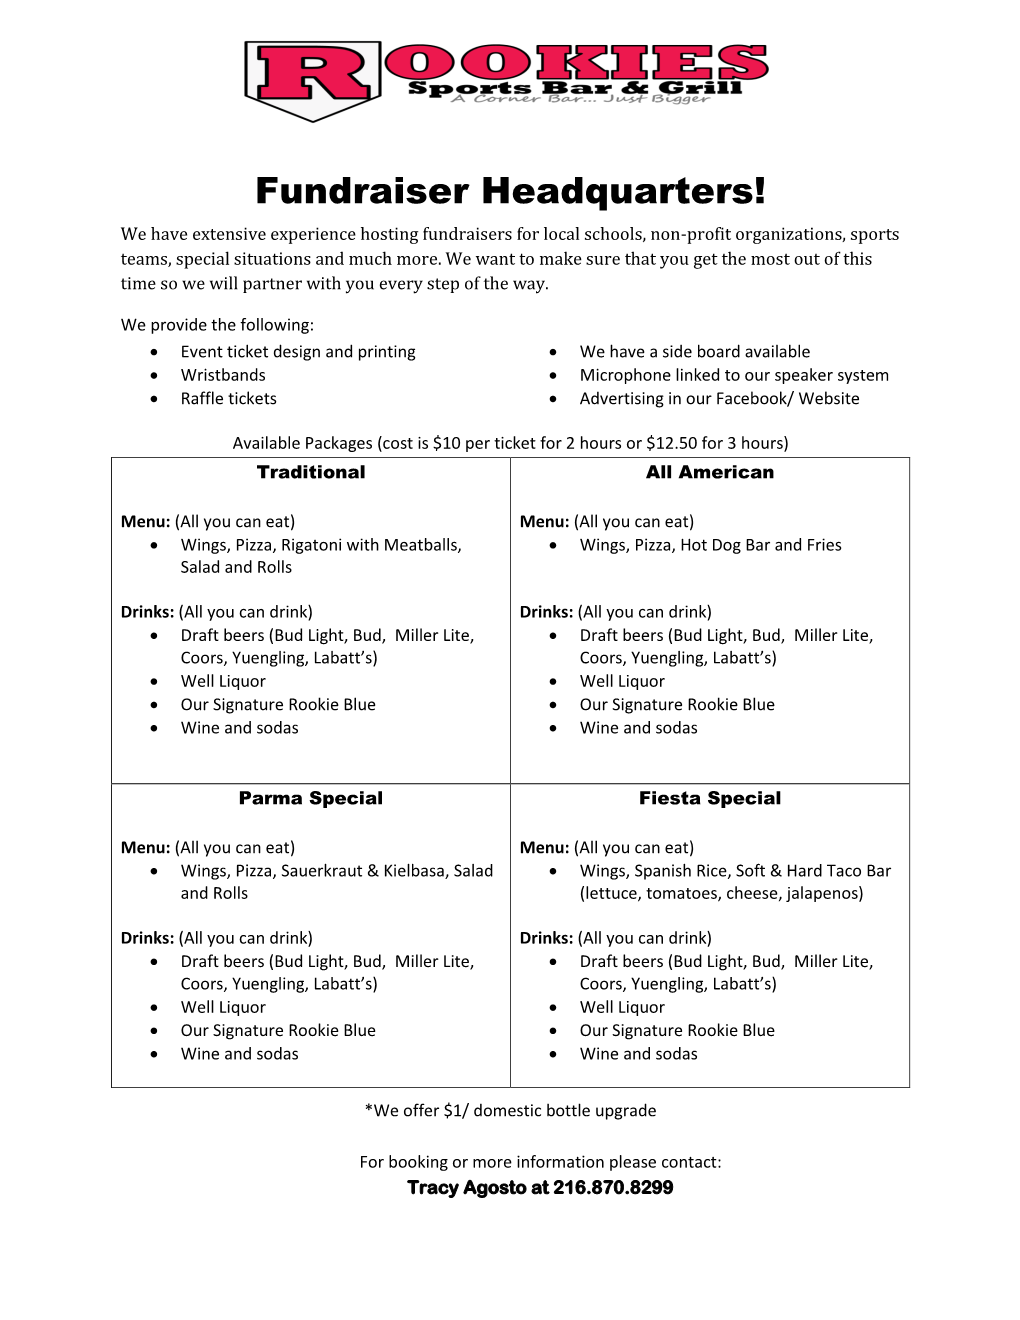 Fundraiser Headquarters! We Have Extensive Experience Hosting Fundraisers for Local Schools, Non-Profit Organizations, Sports Teams, Special Situations and Much More